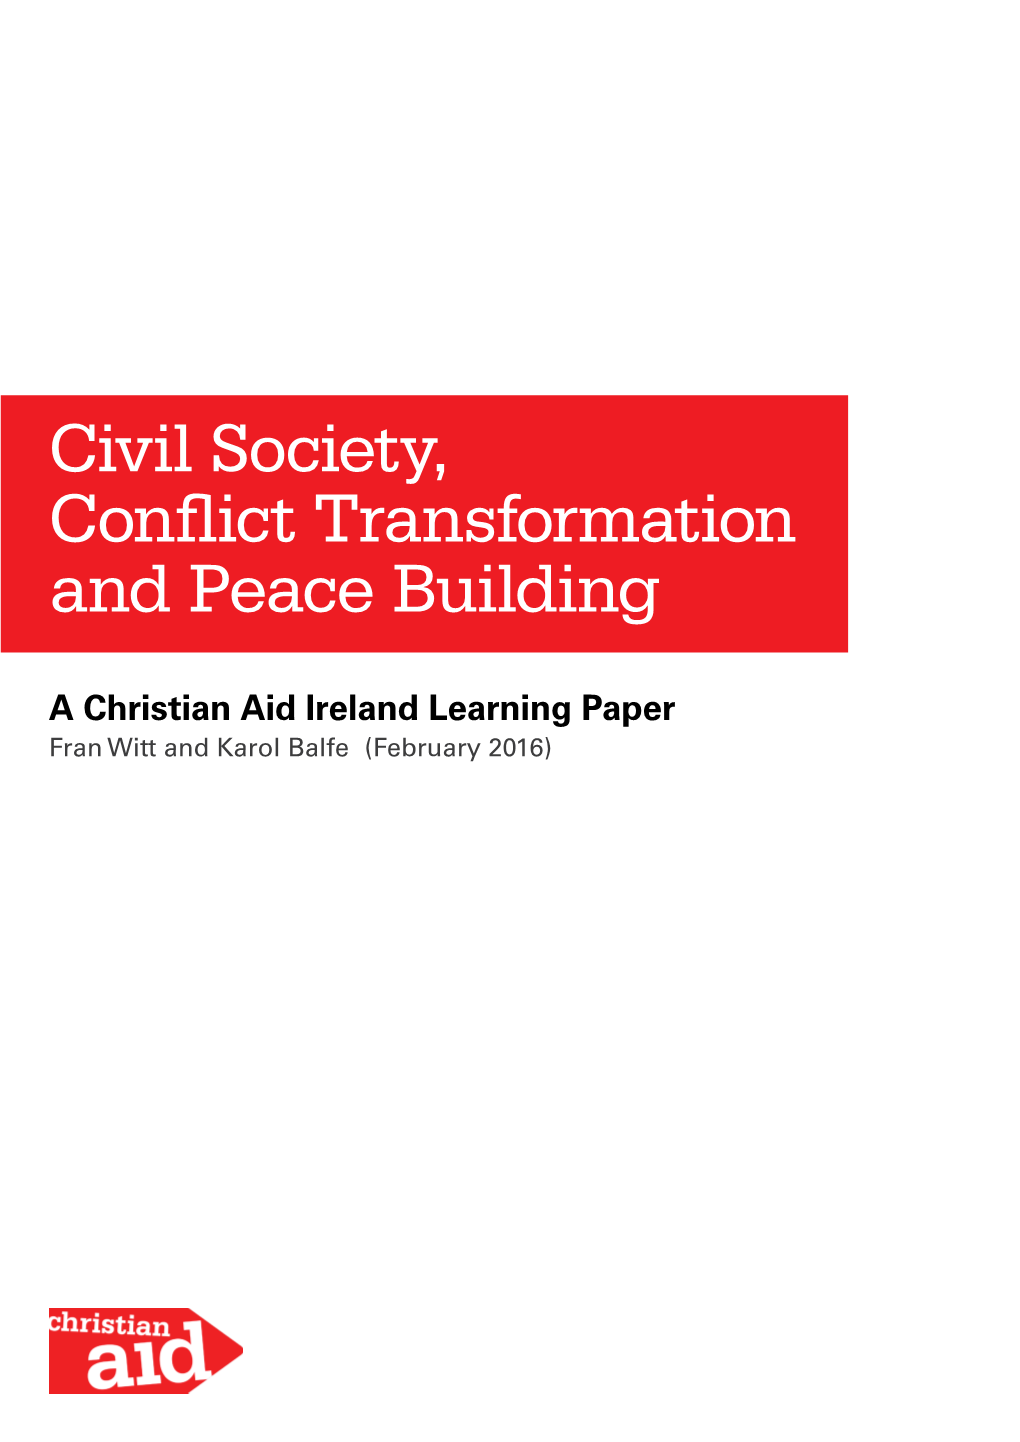 Civil Society, Conflict Transformation and Peace Building